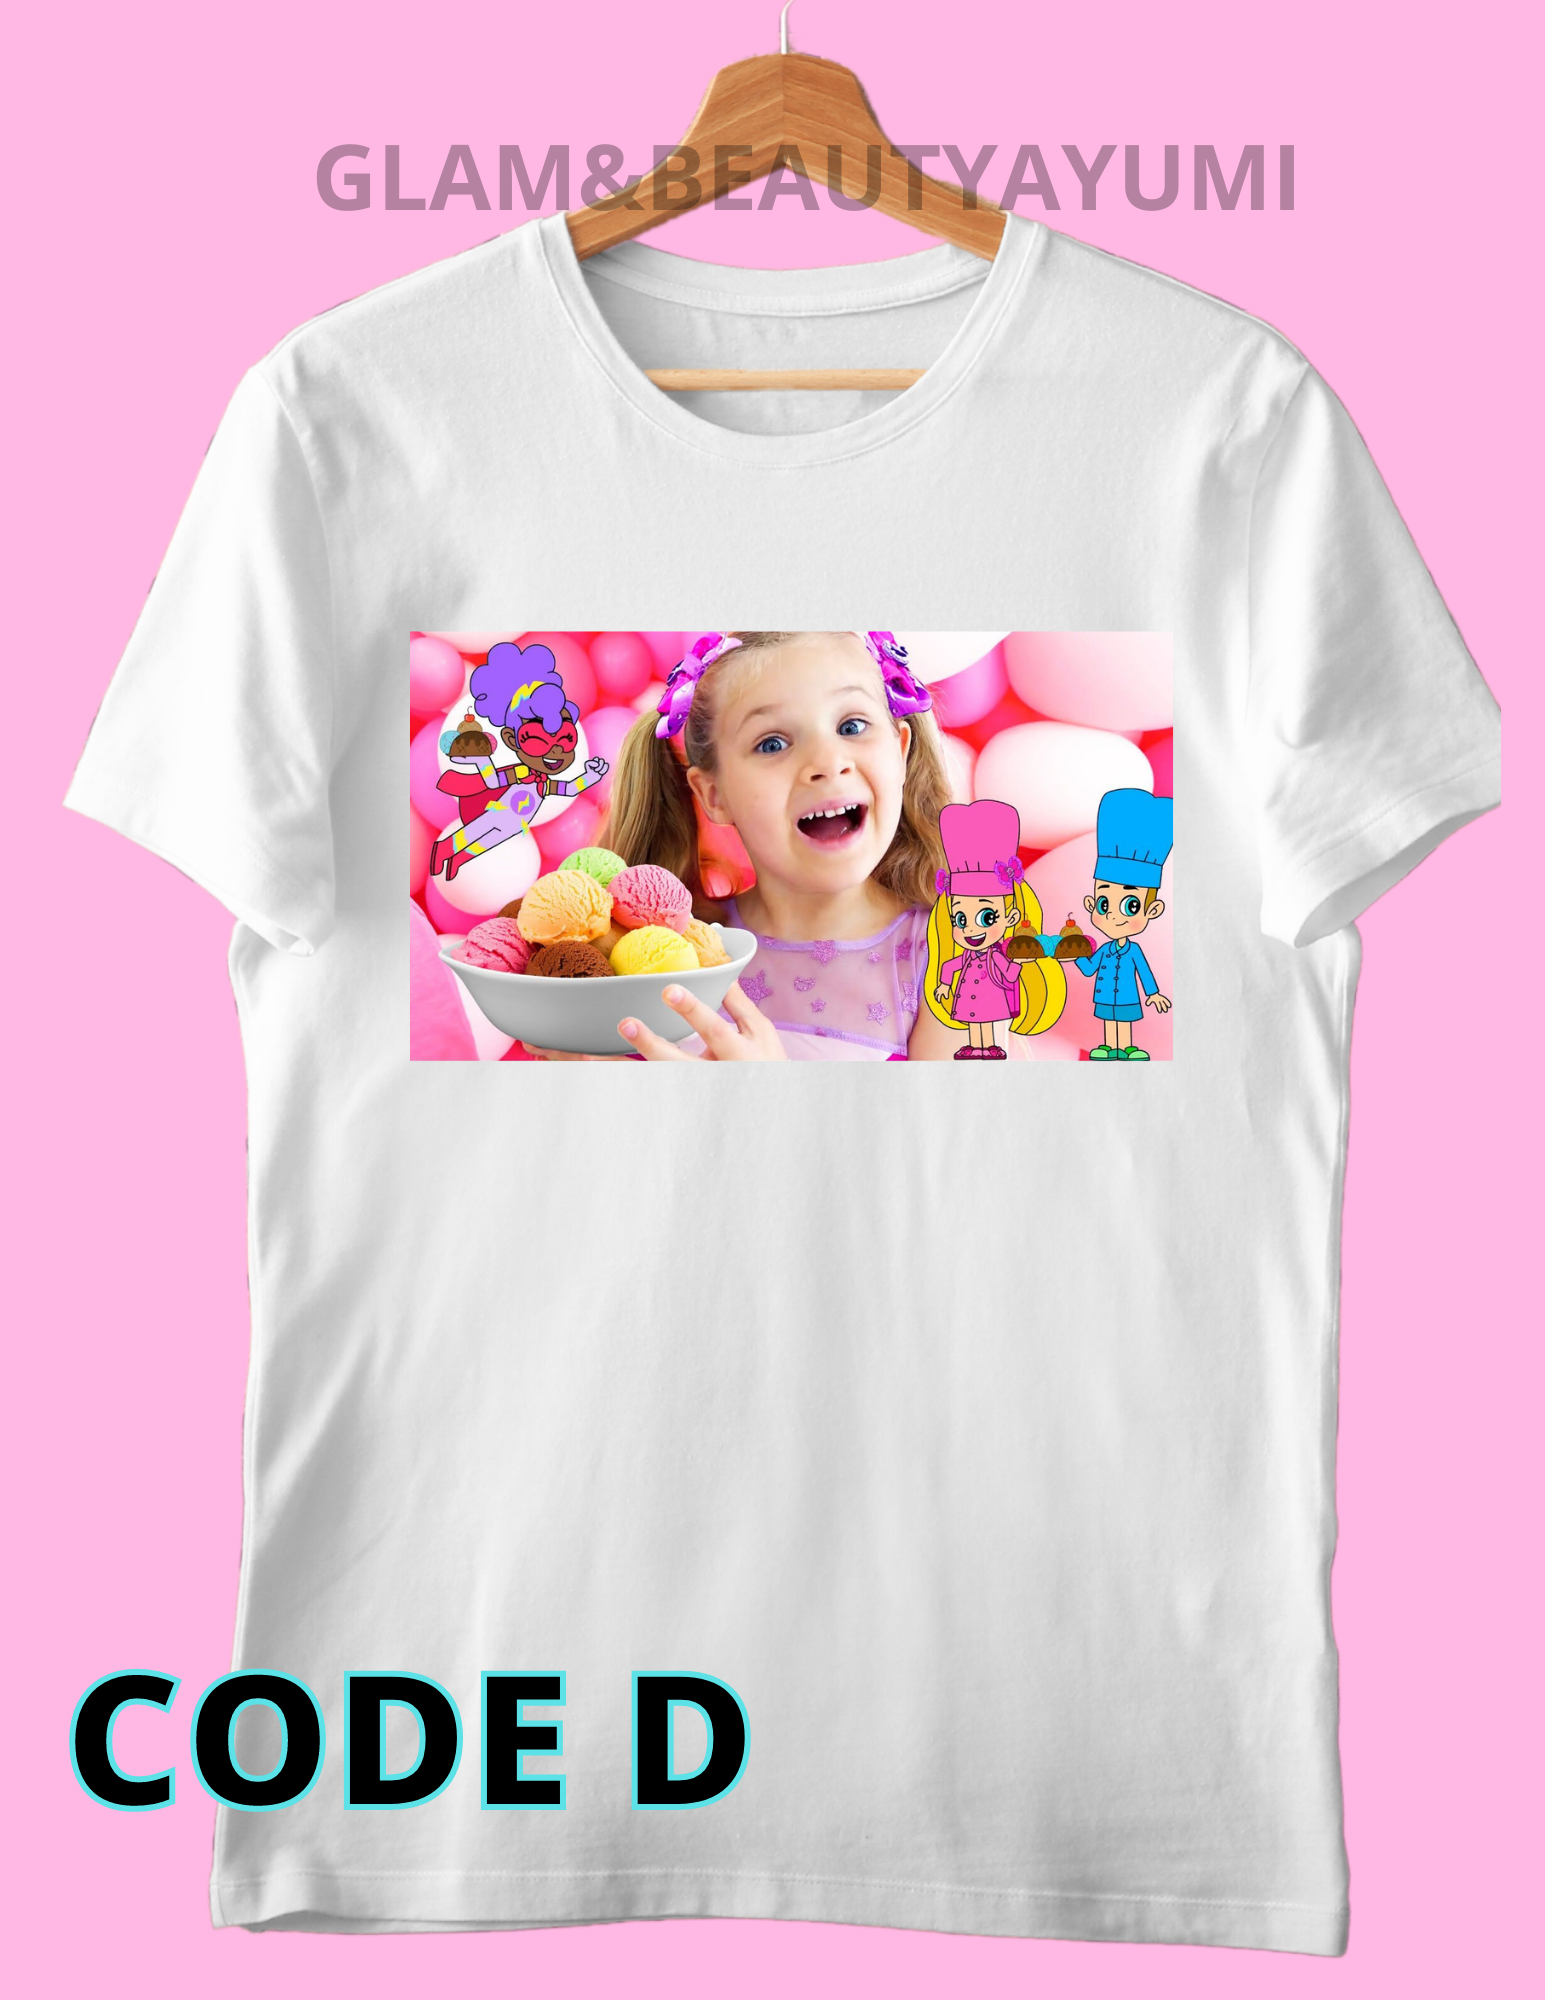 Children'S Pink Tshirts Newly Girls T-Shirt Cute The Kids Diana And Roma  Show Print Summer Fashion Girl Clothes Tops